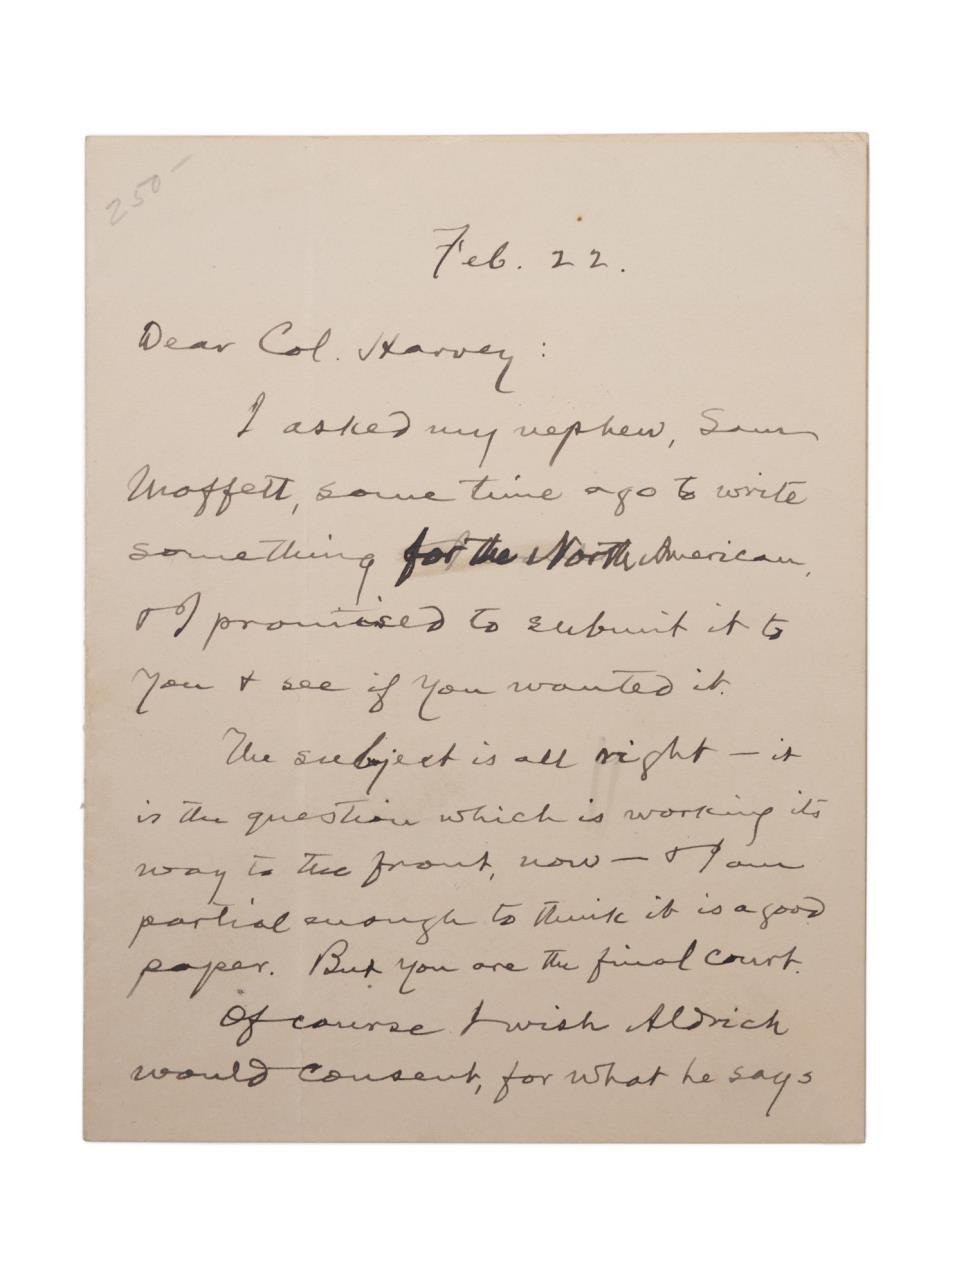 MARK TWAIN SIGNED LETTER TO COLONEL 3cd7b8